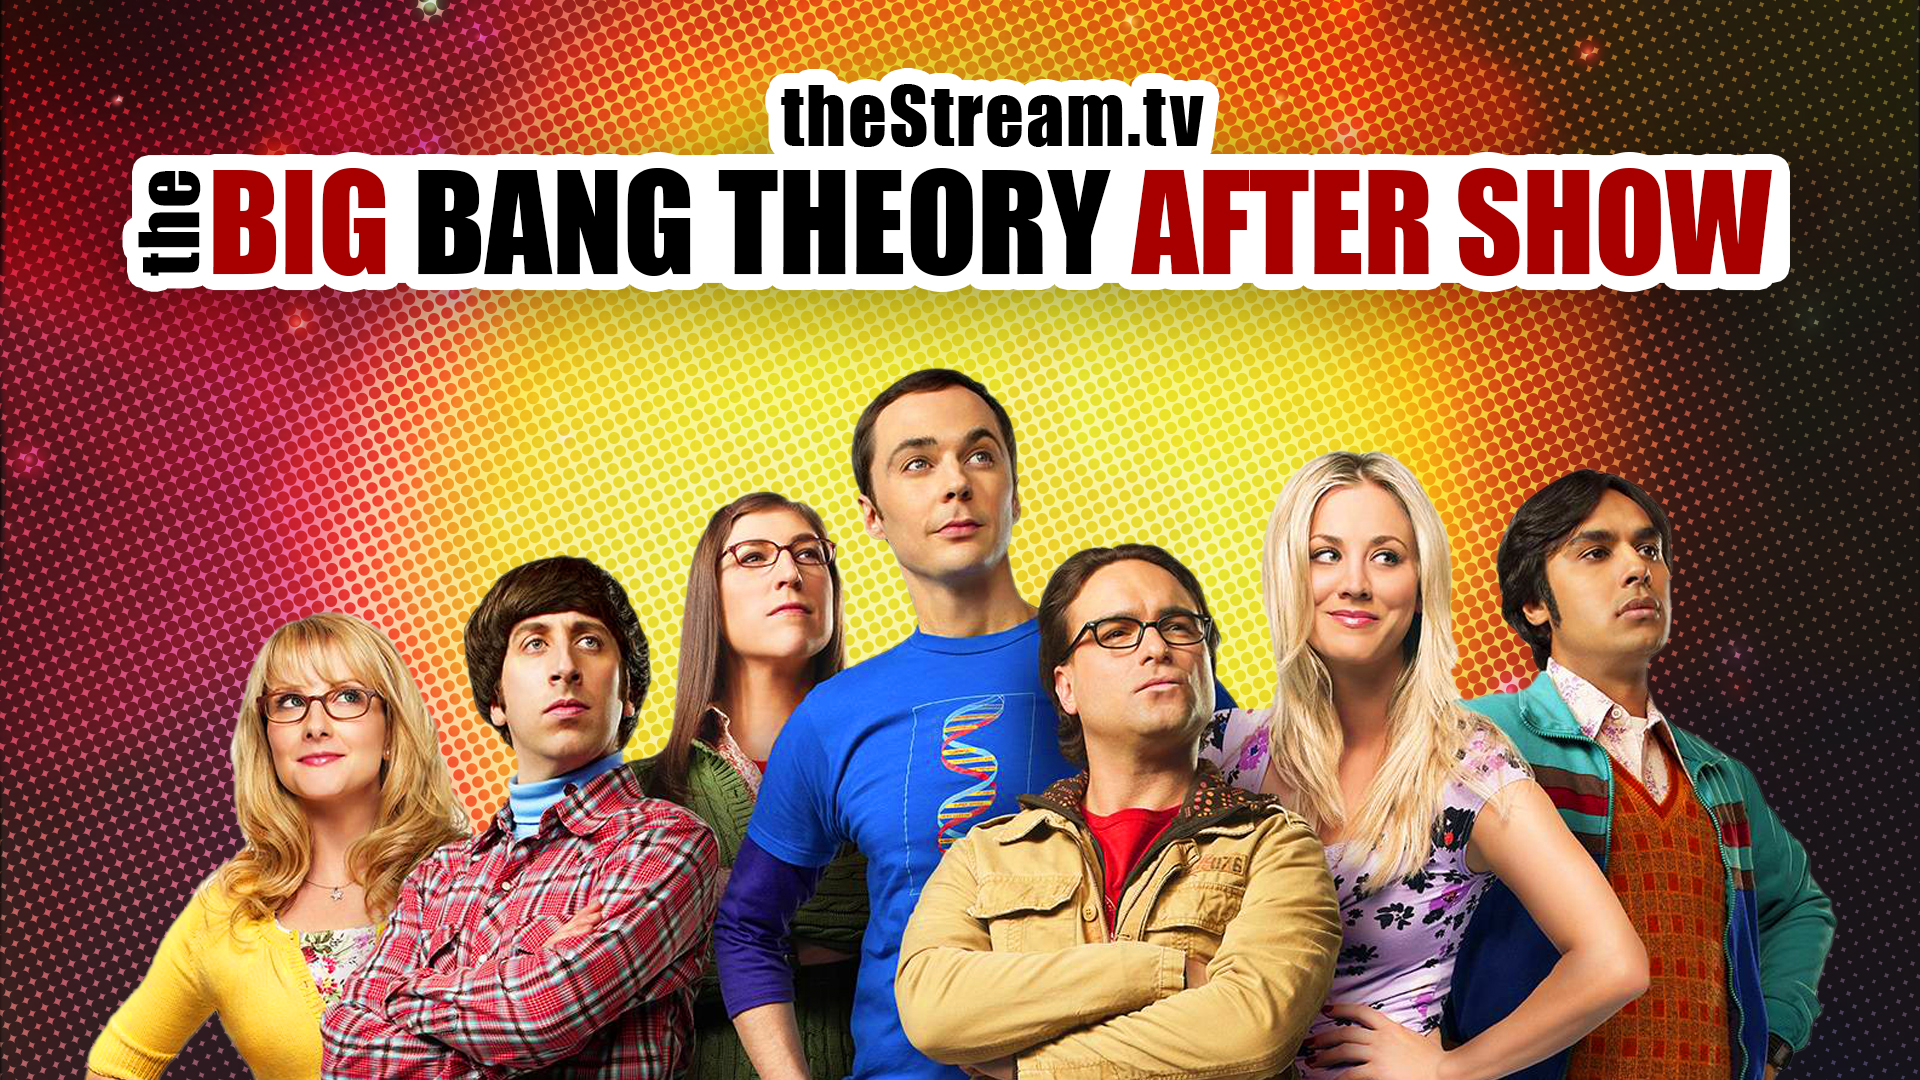 The Big Bang Theory After Show